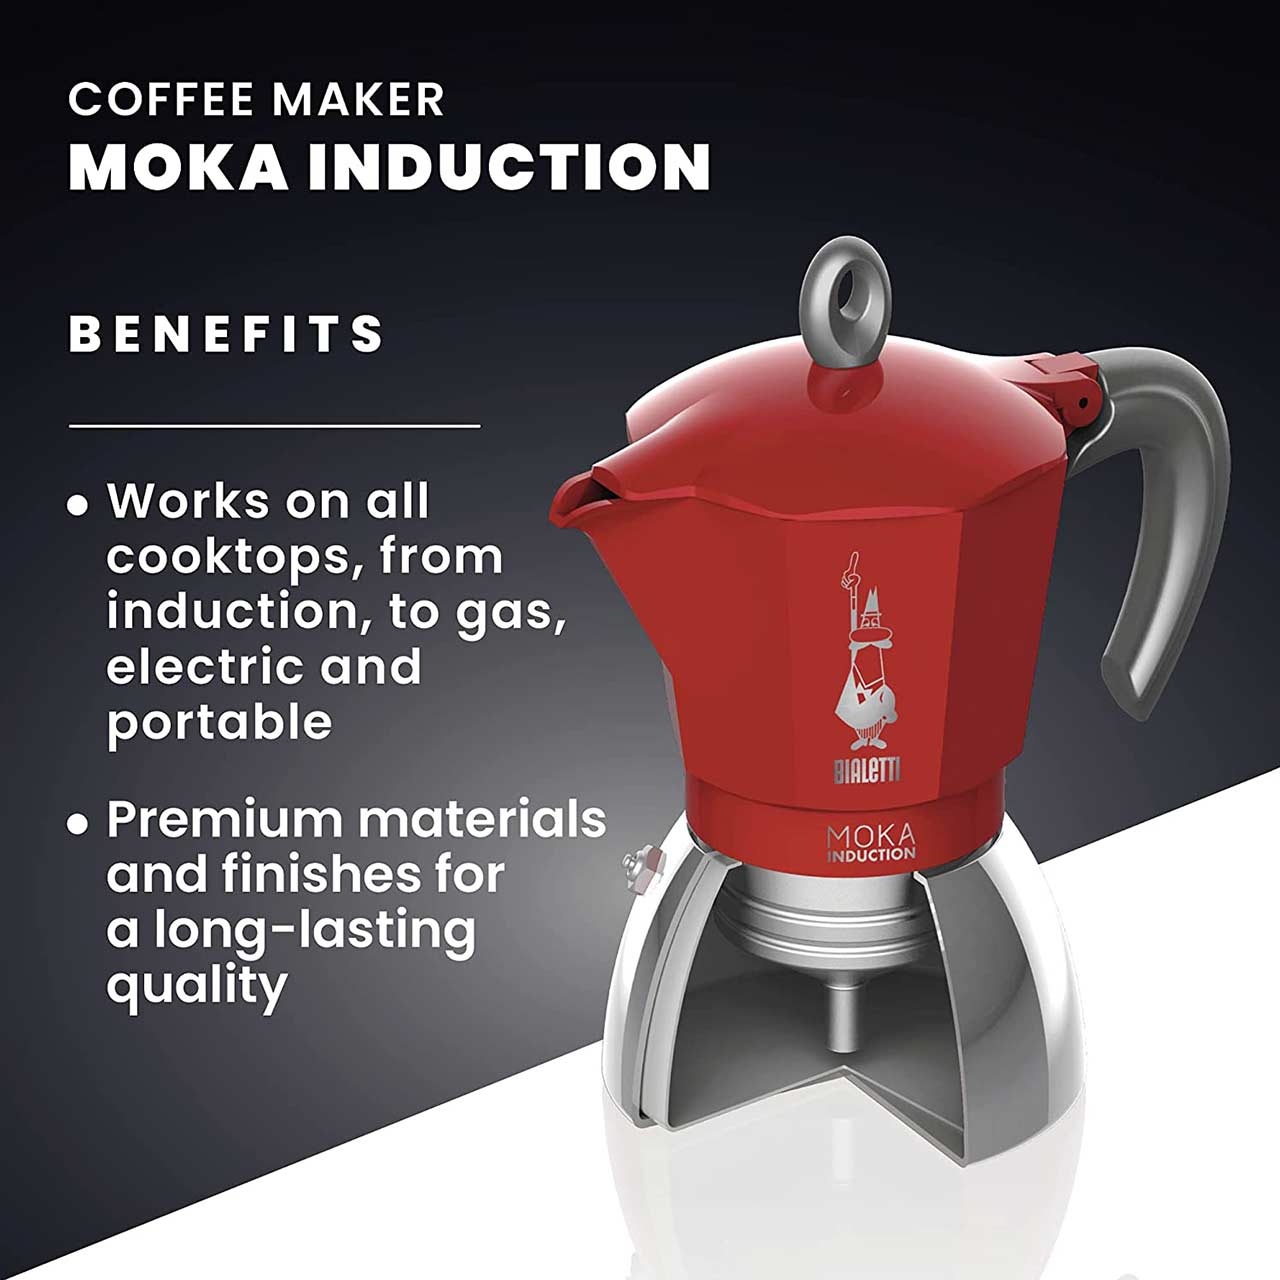 https://cdn11.bigcommerce.com/s-2plzc/images/stencil/original/products/2178/33027/Bialetti-moka-induction-red-3-cup-CM821-3-1-op__59457.1634691623.jpg?c=2